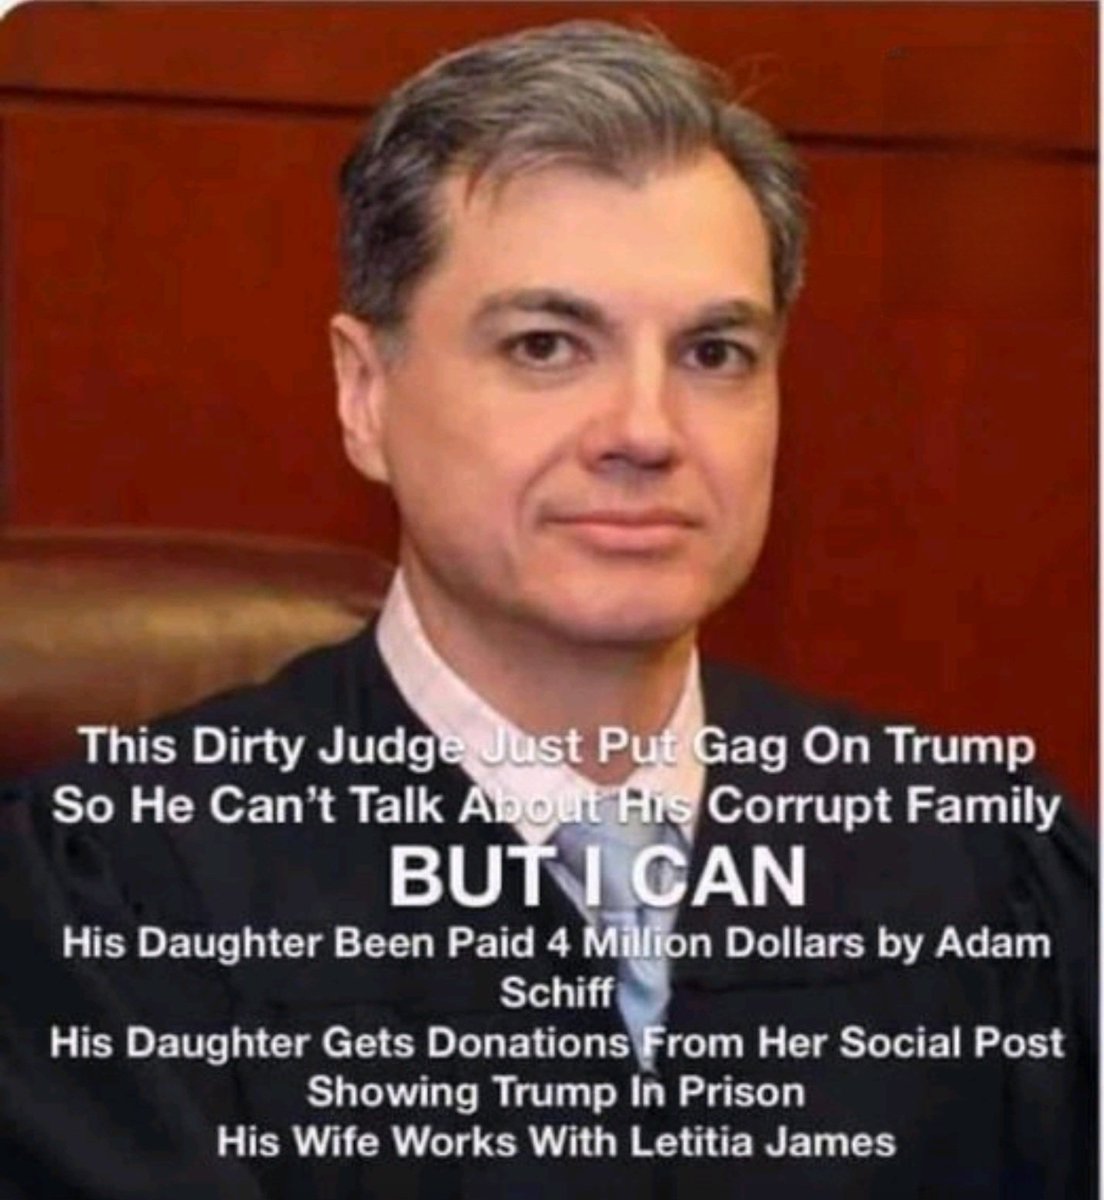 Heres some information to know about the judge who is over this case against Donald Trump.